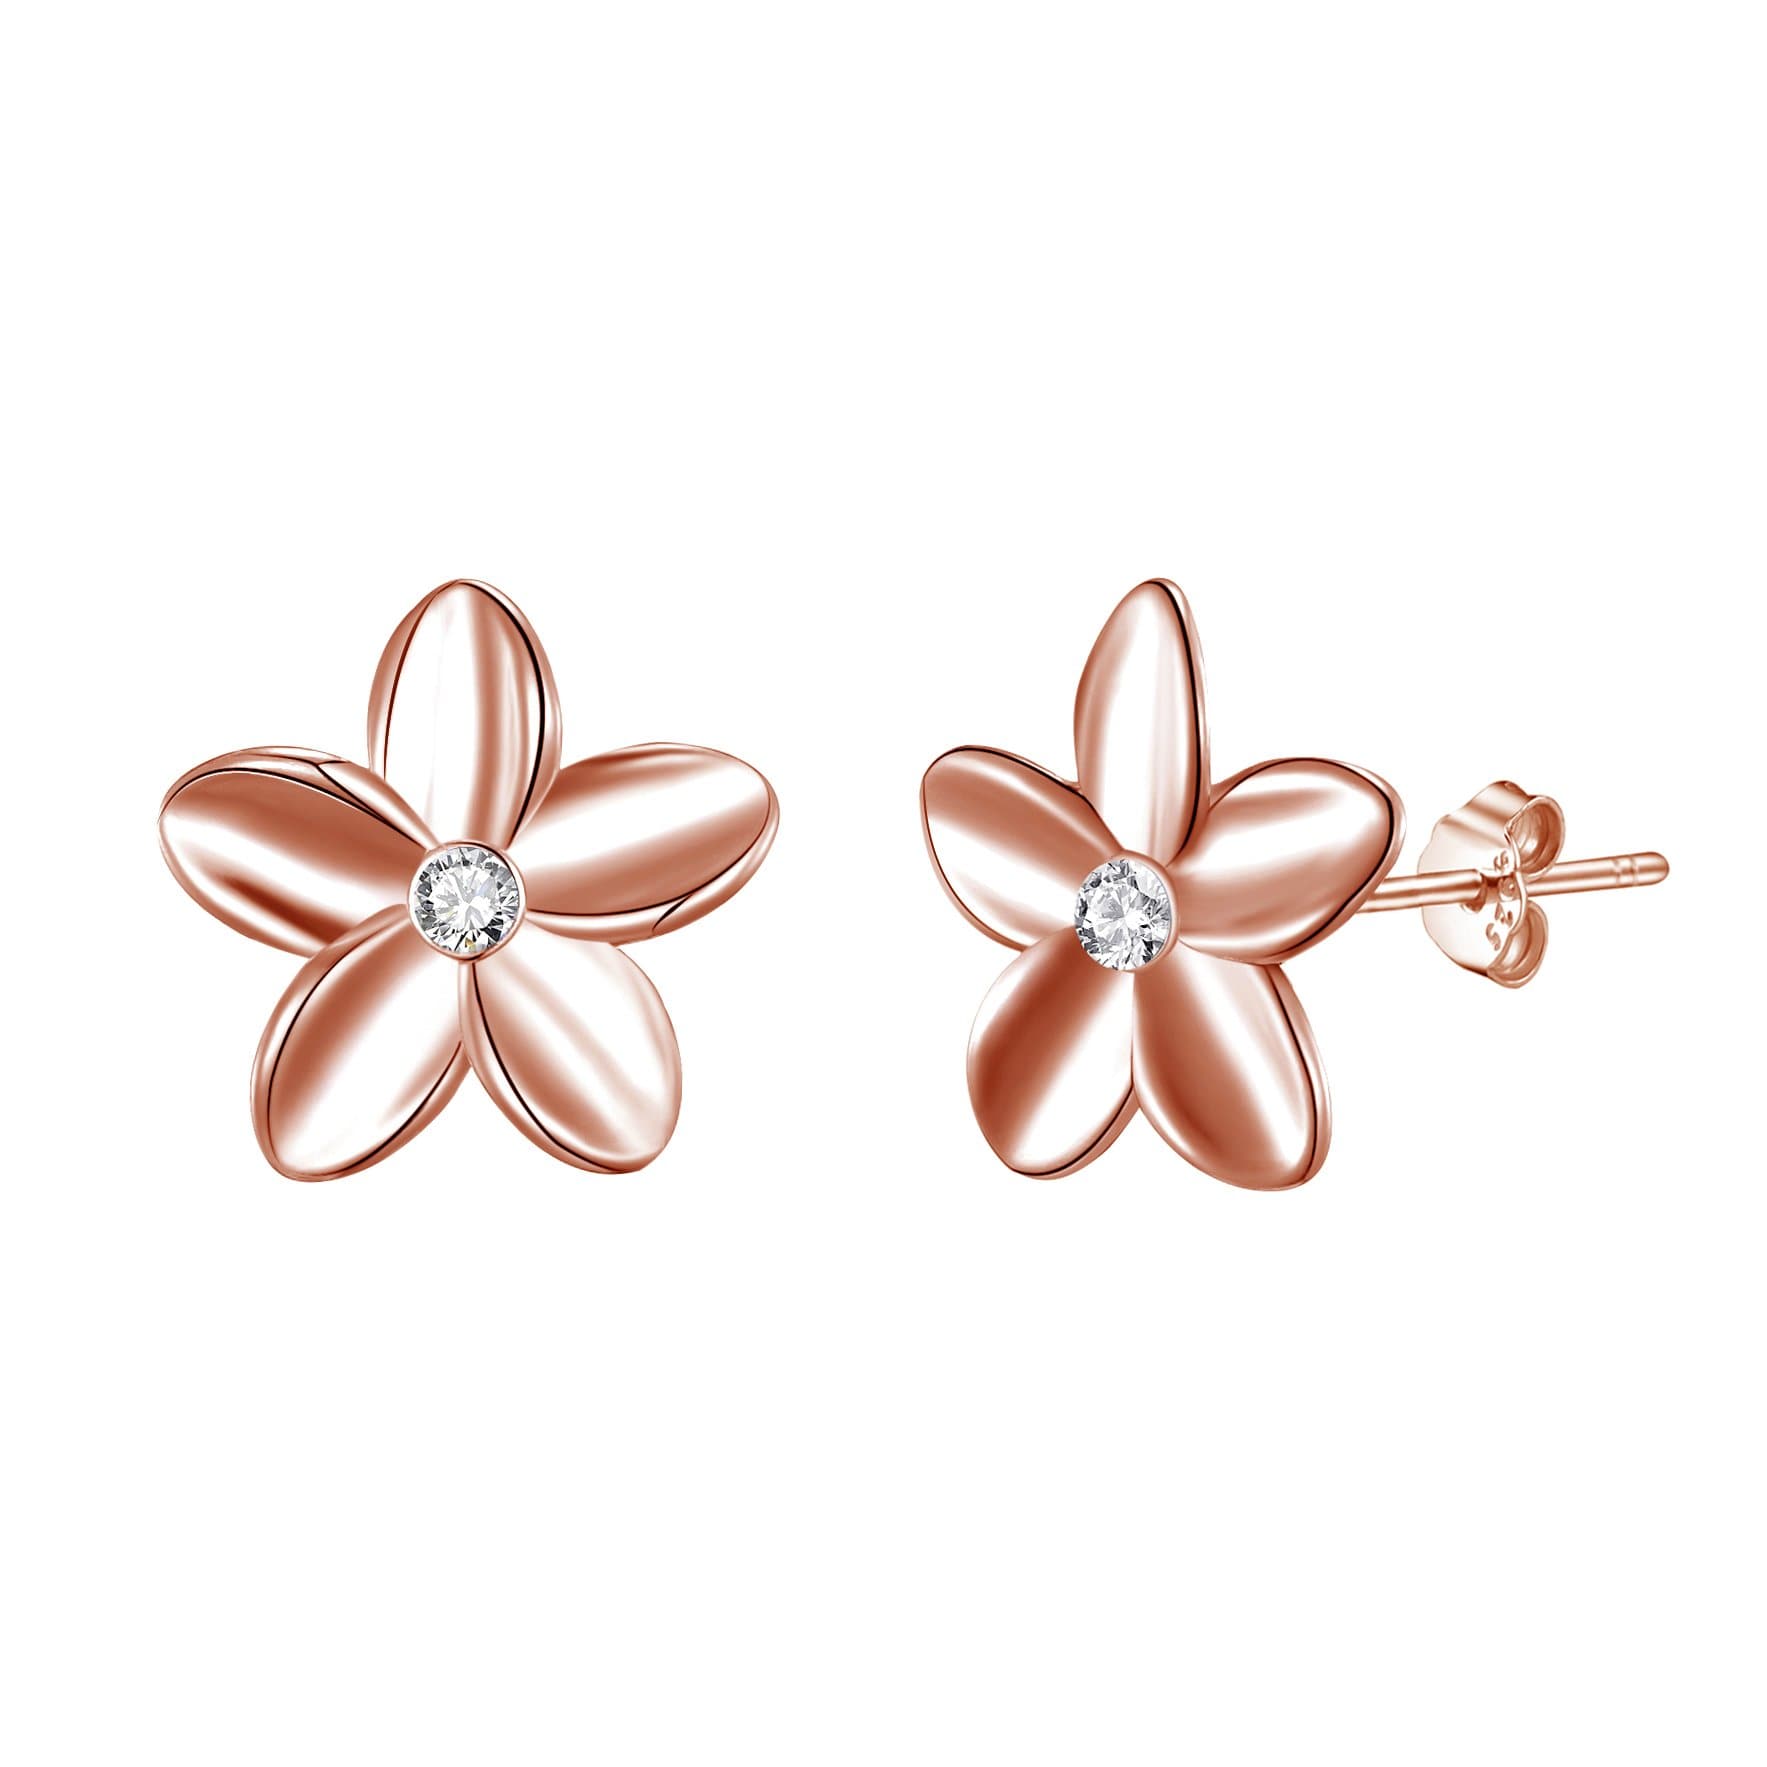 Rose Gold Plated Sterling Silver Flower Earrings Created with Zircondia® Crystals by Philip Jones Jewellery